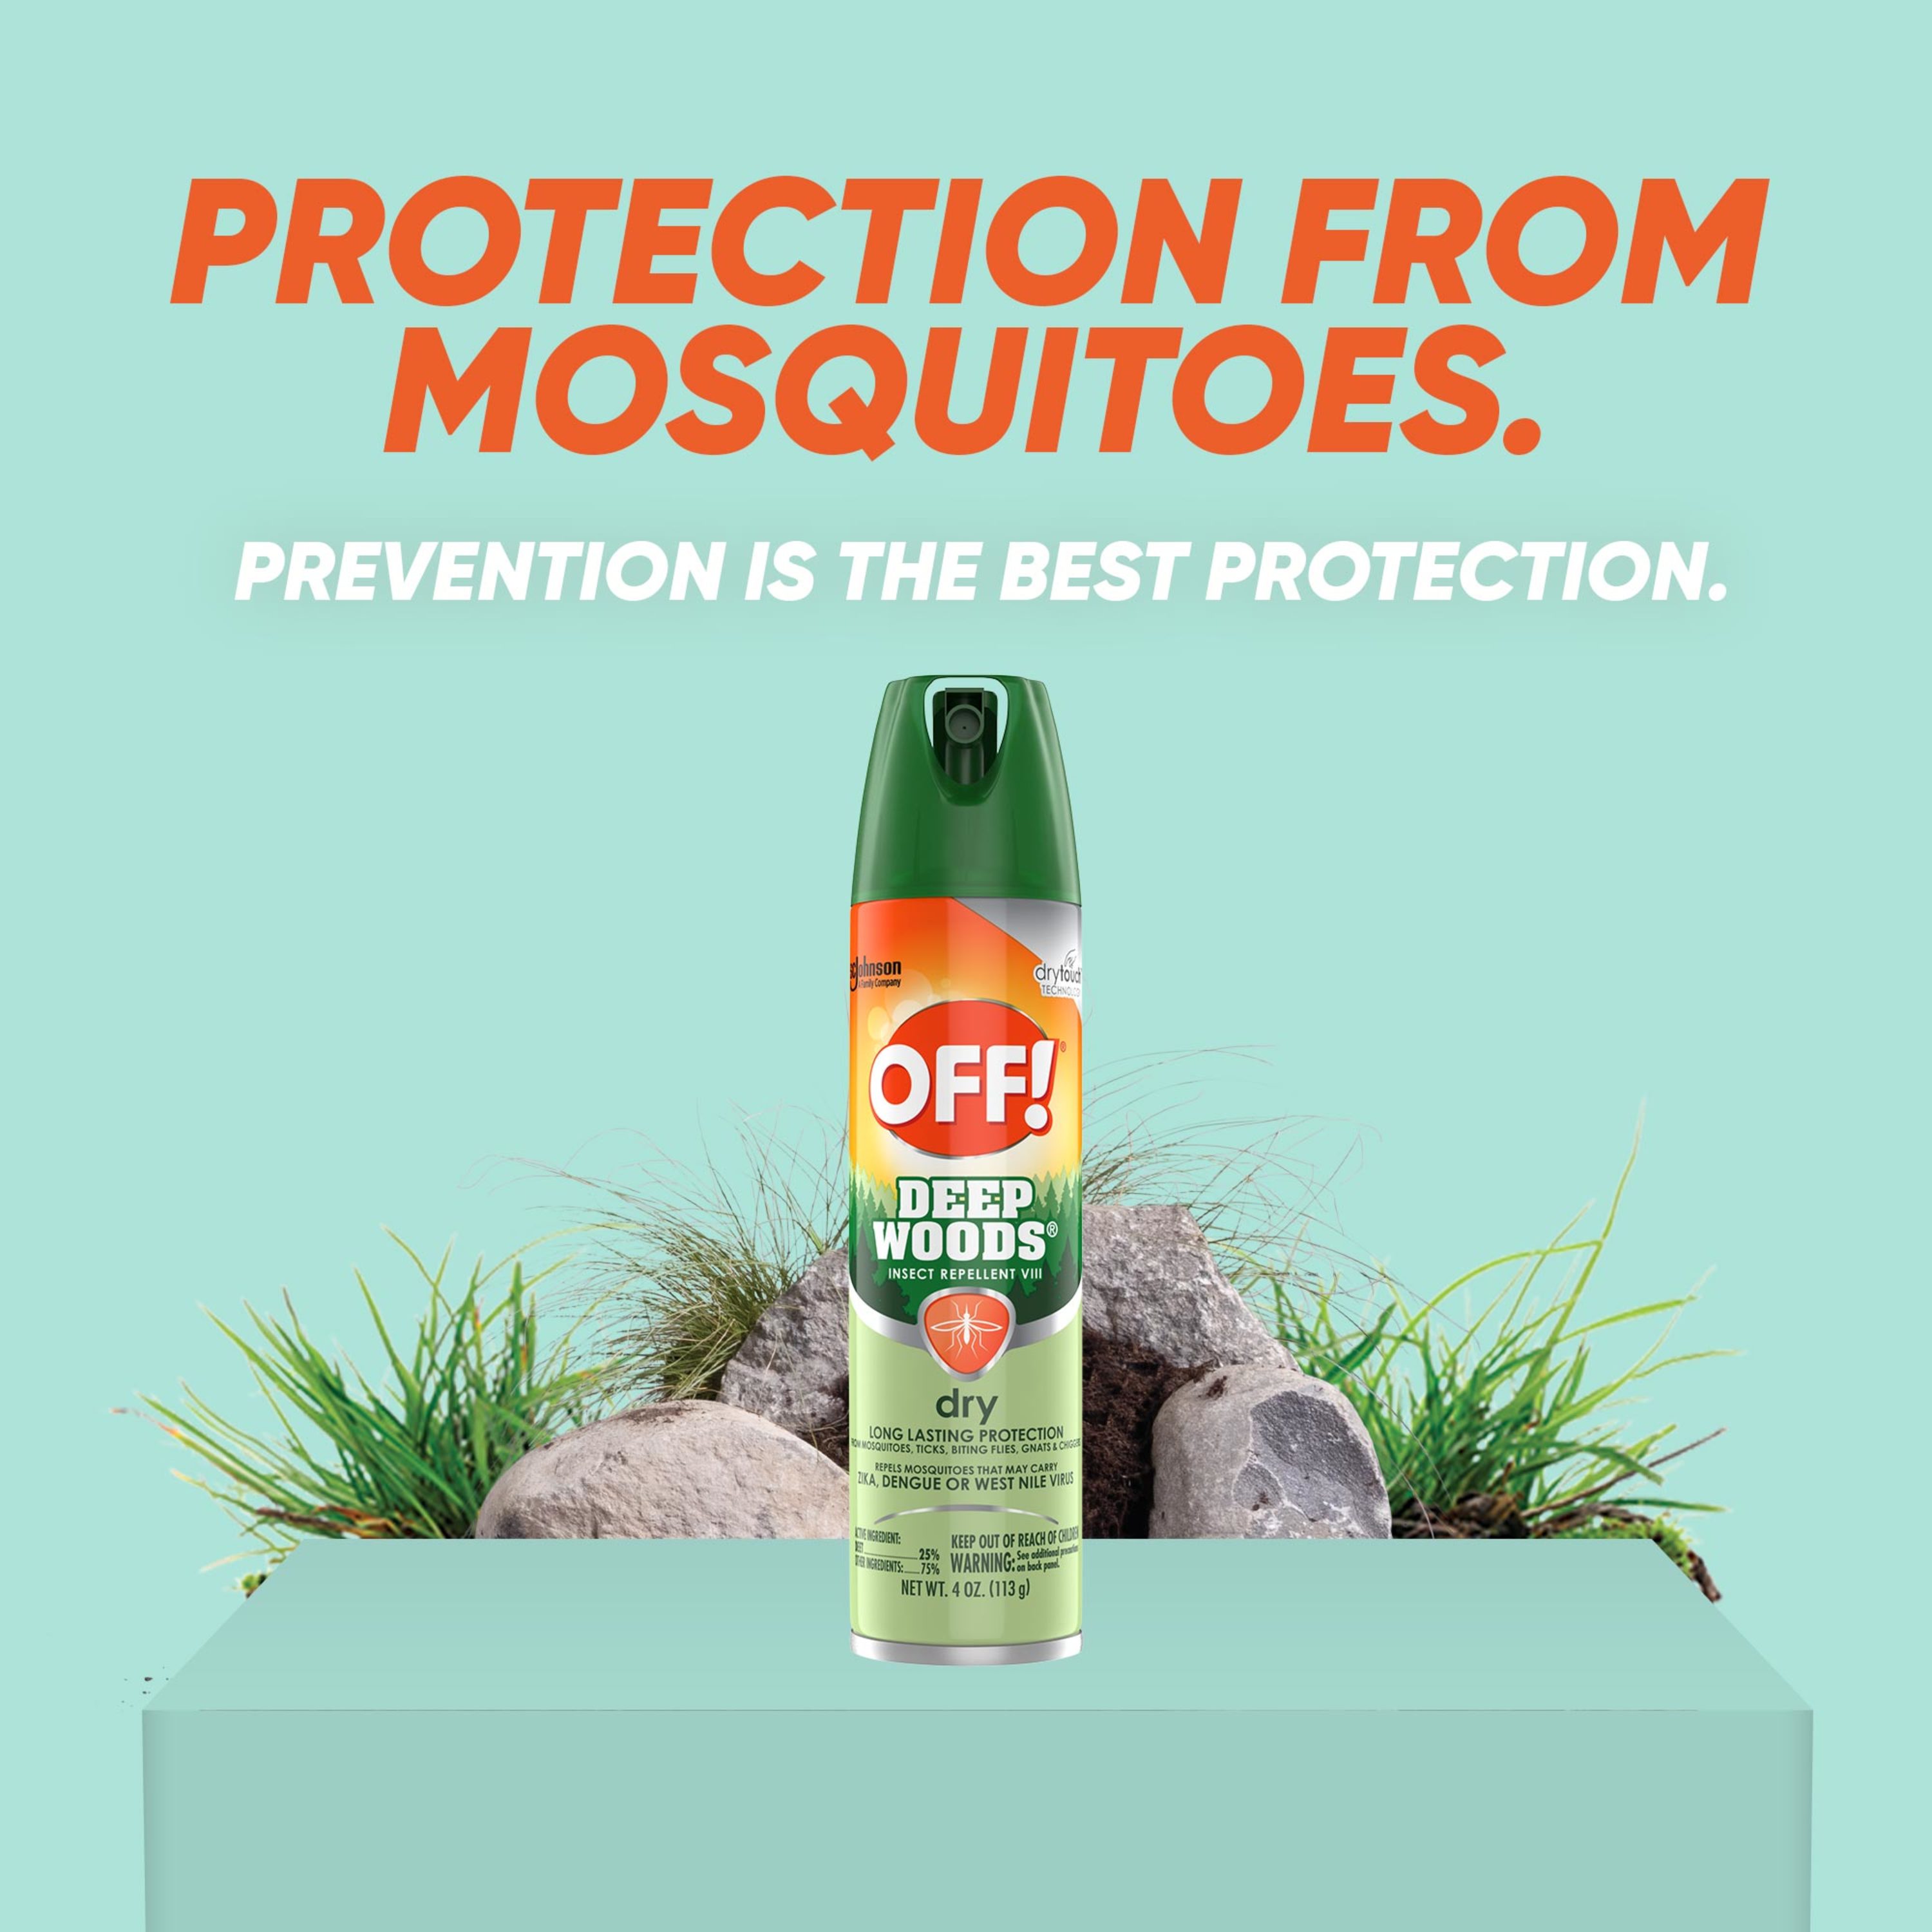 OFF! Deep Woods Non-Greasy Mosquito Repellent Dry Bug Spray with DEET, 4 oz, 2 Count - image 3 of 16